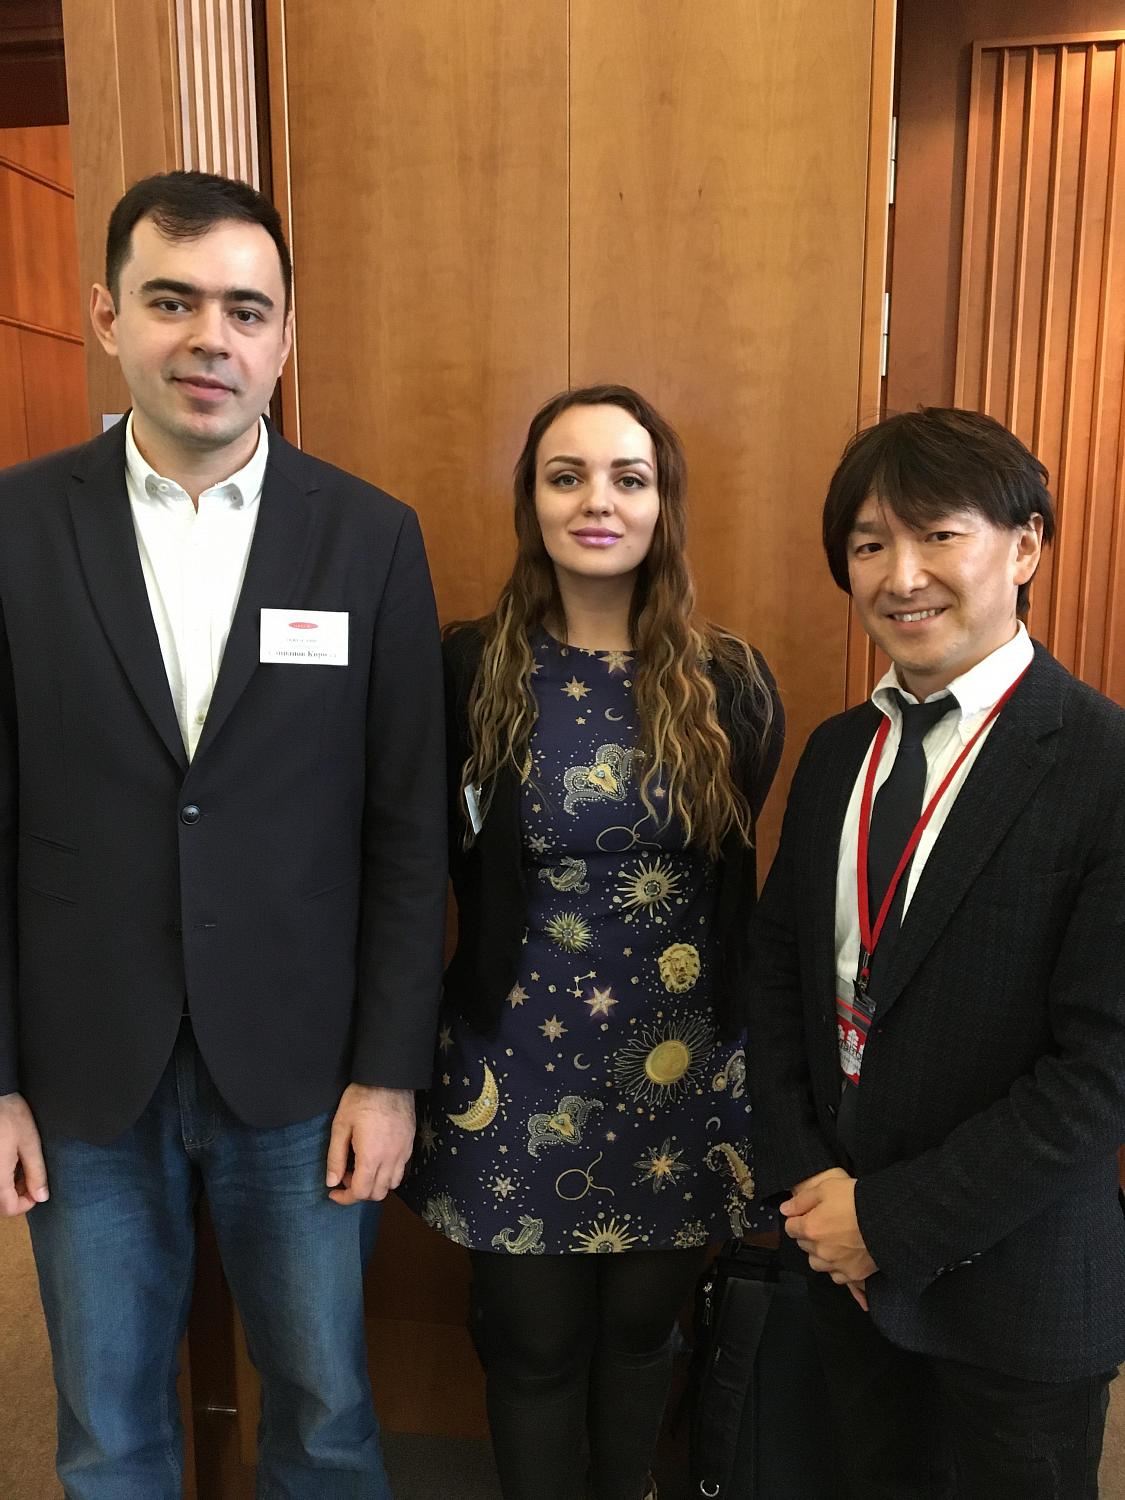 In the Japanese Embassy of Moscow, the Japanese-Russian Forum for SME representatives was held. The attendance by 200 companies exceeded the number of available seats